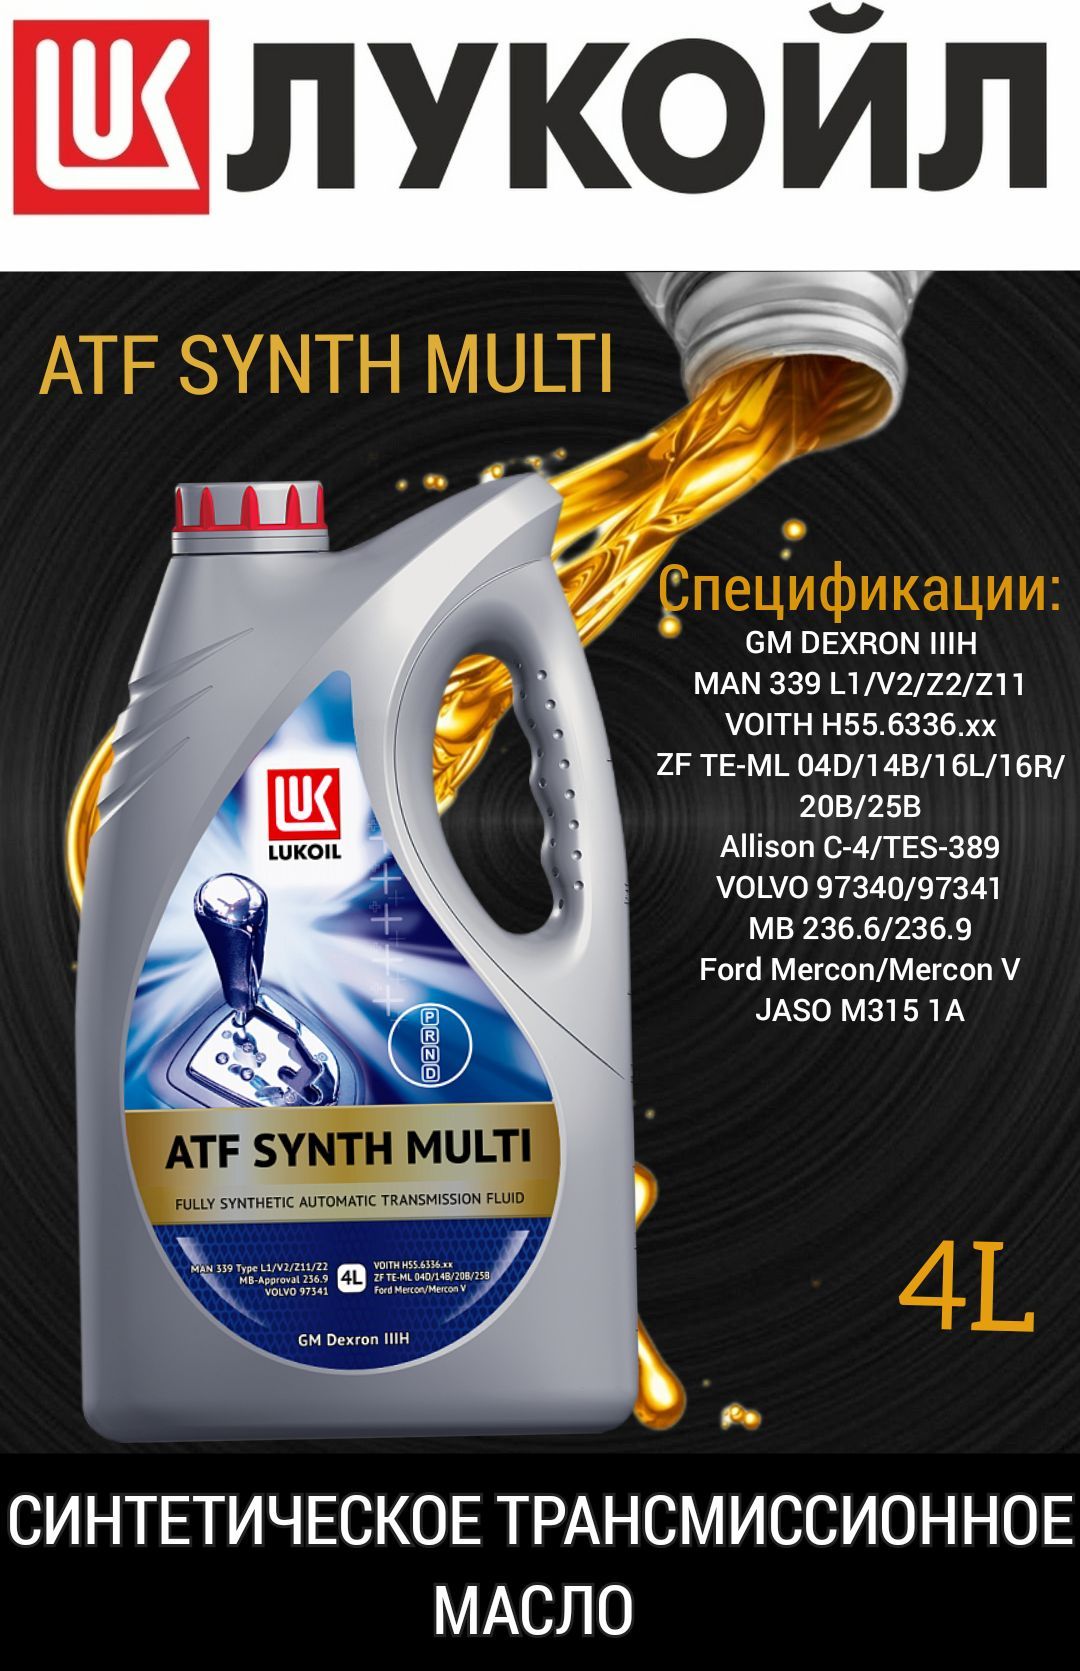 Atf synth multi. Масло Лукойл ATF Synth Multi. Лукойл ATF Synth vi (20l). Лукойл ATF Synth lv. Lukoil ATF Synth Asia в Вольво.